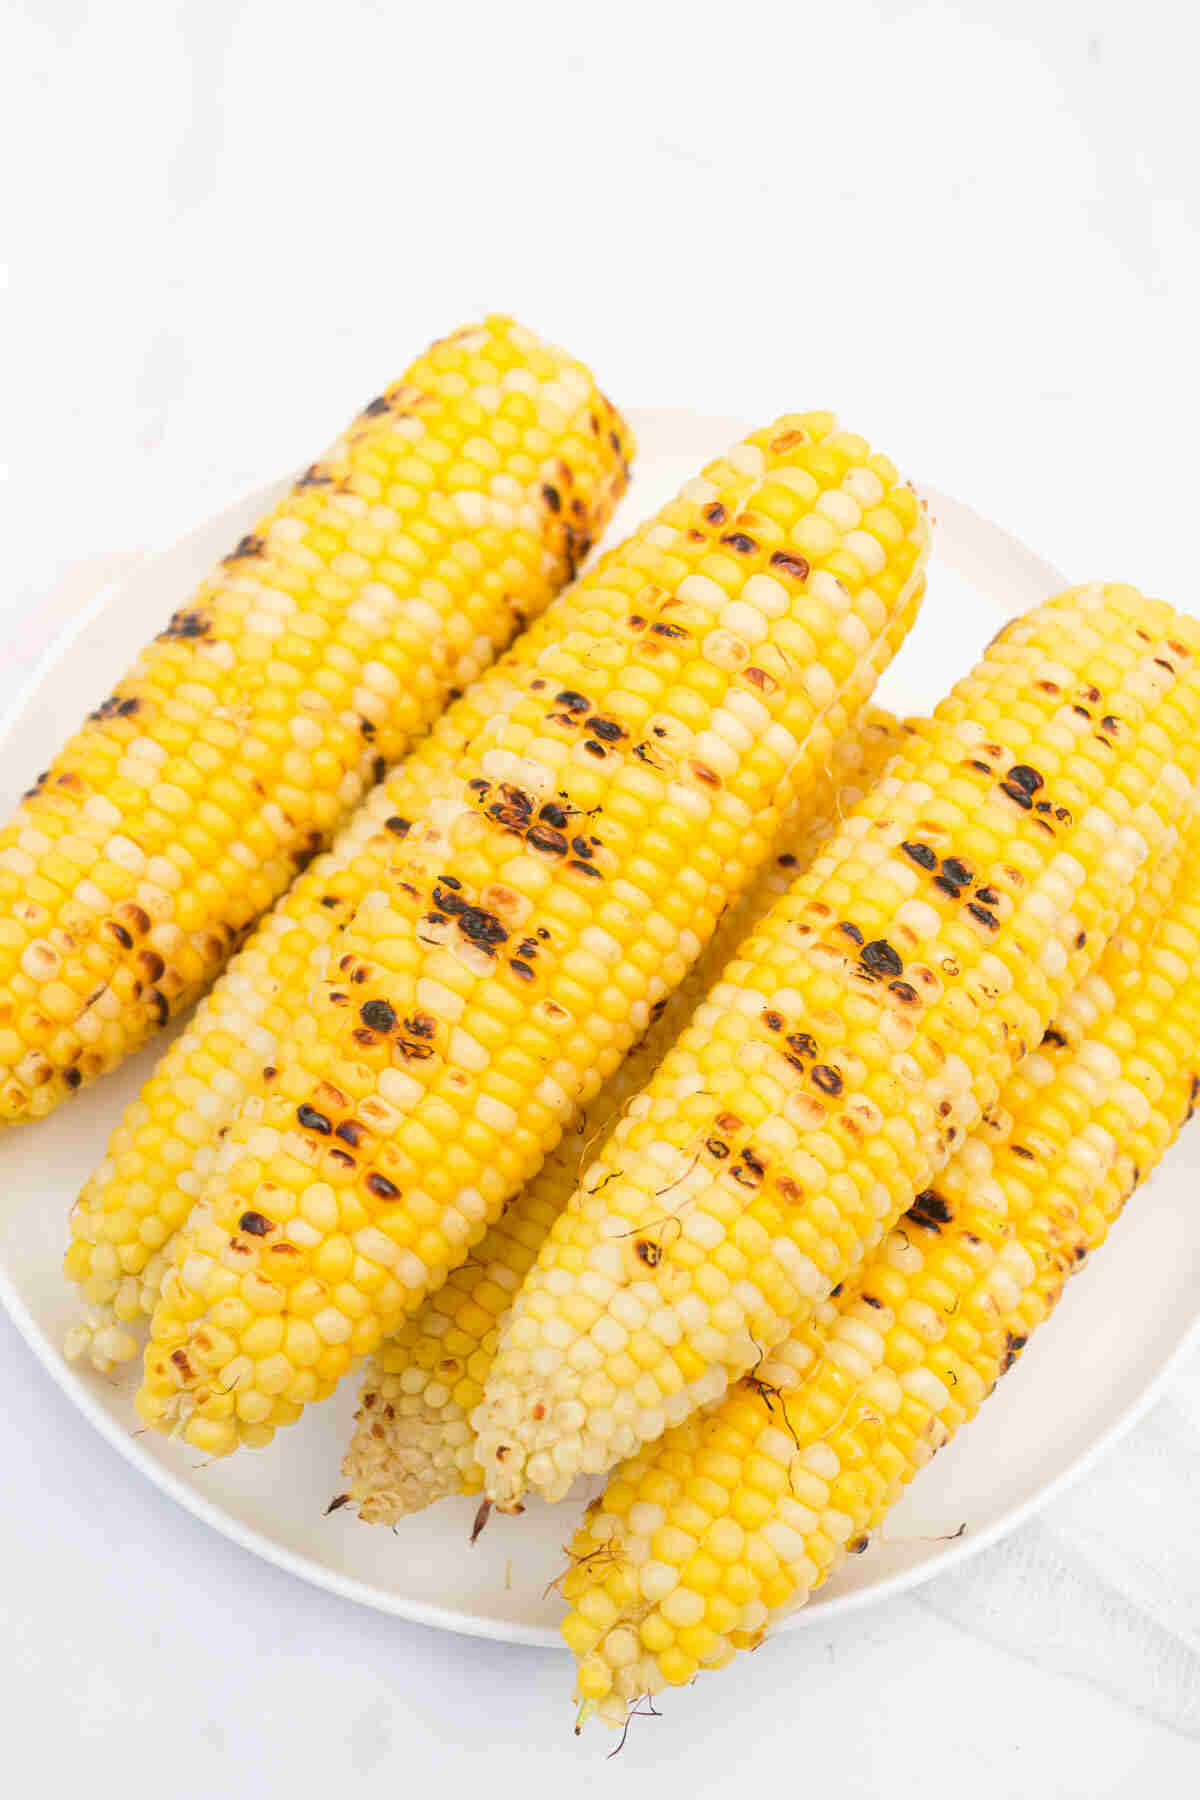 the finished corn on a white plate and ready to serve.